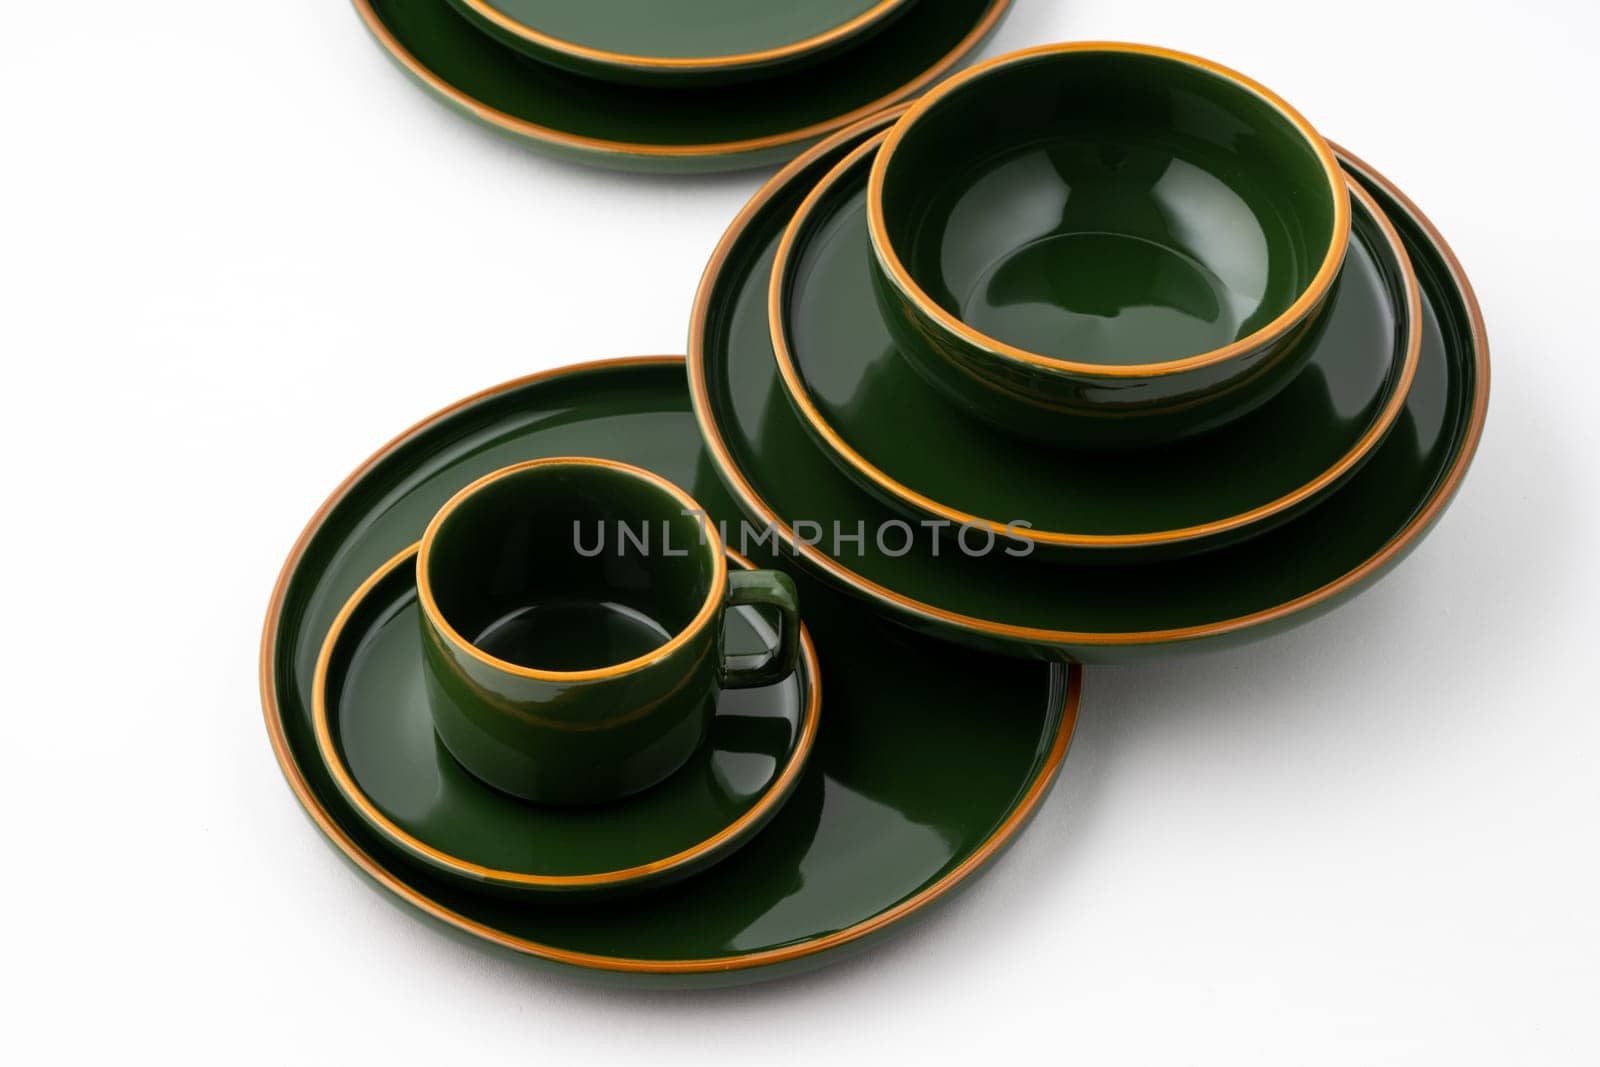 A set of dark green ceramic tableware with orange outlines by A_Karim